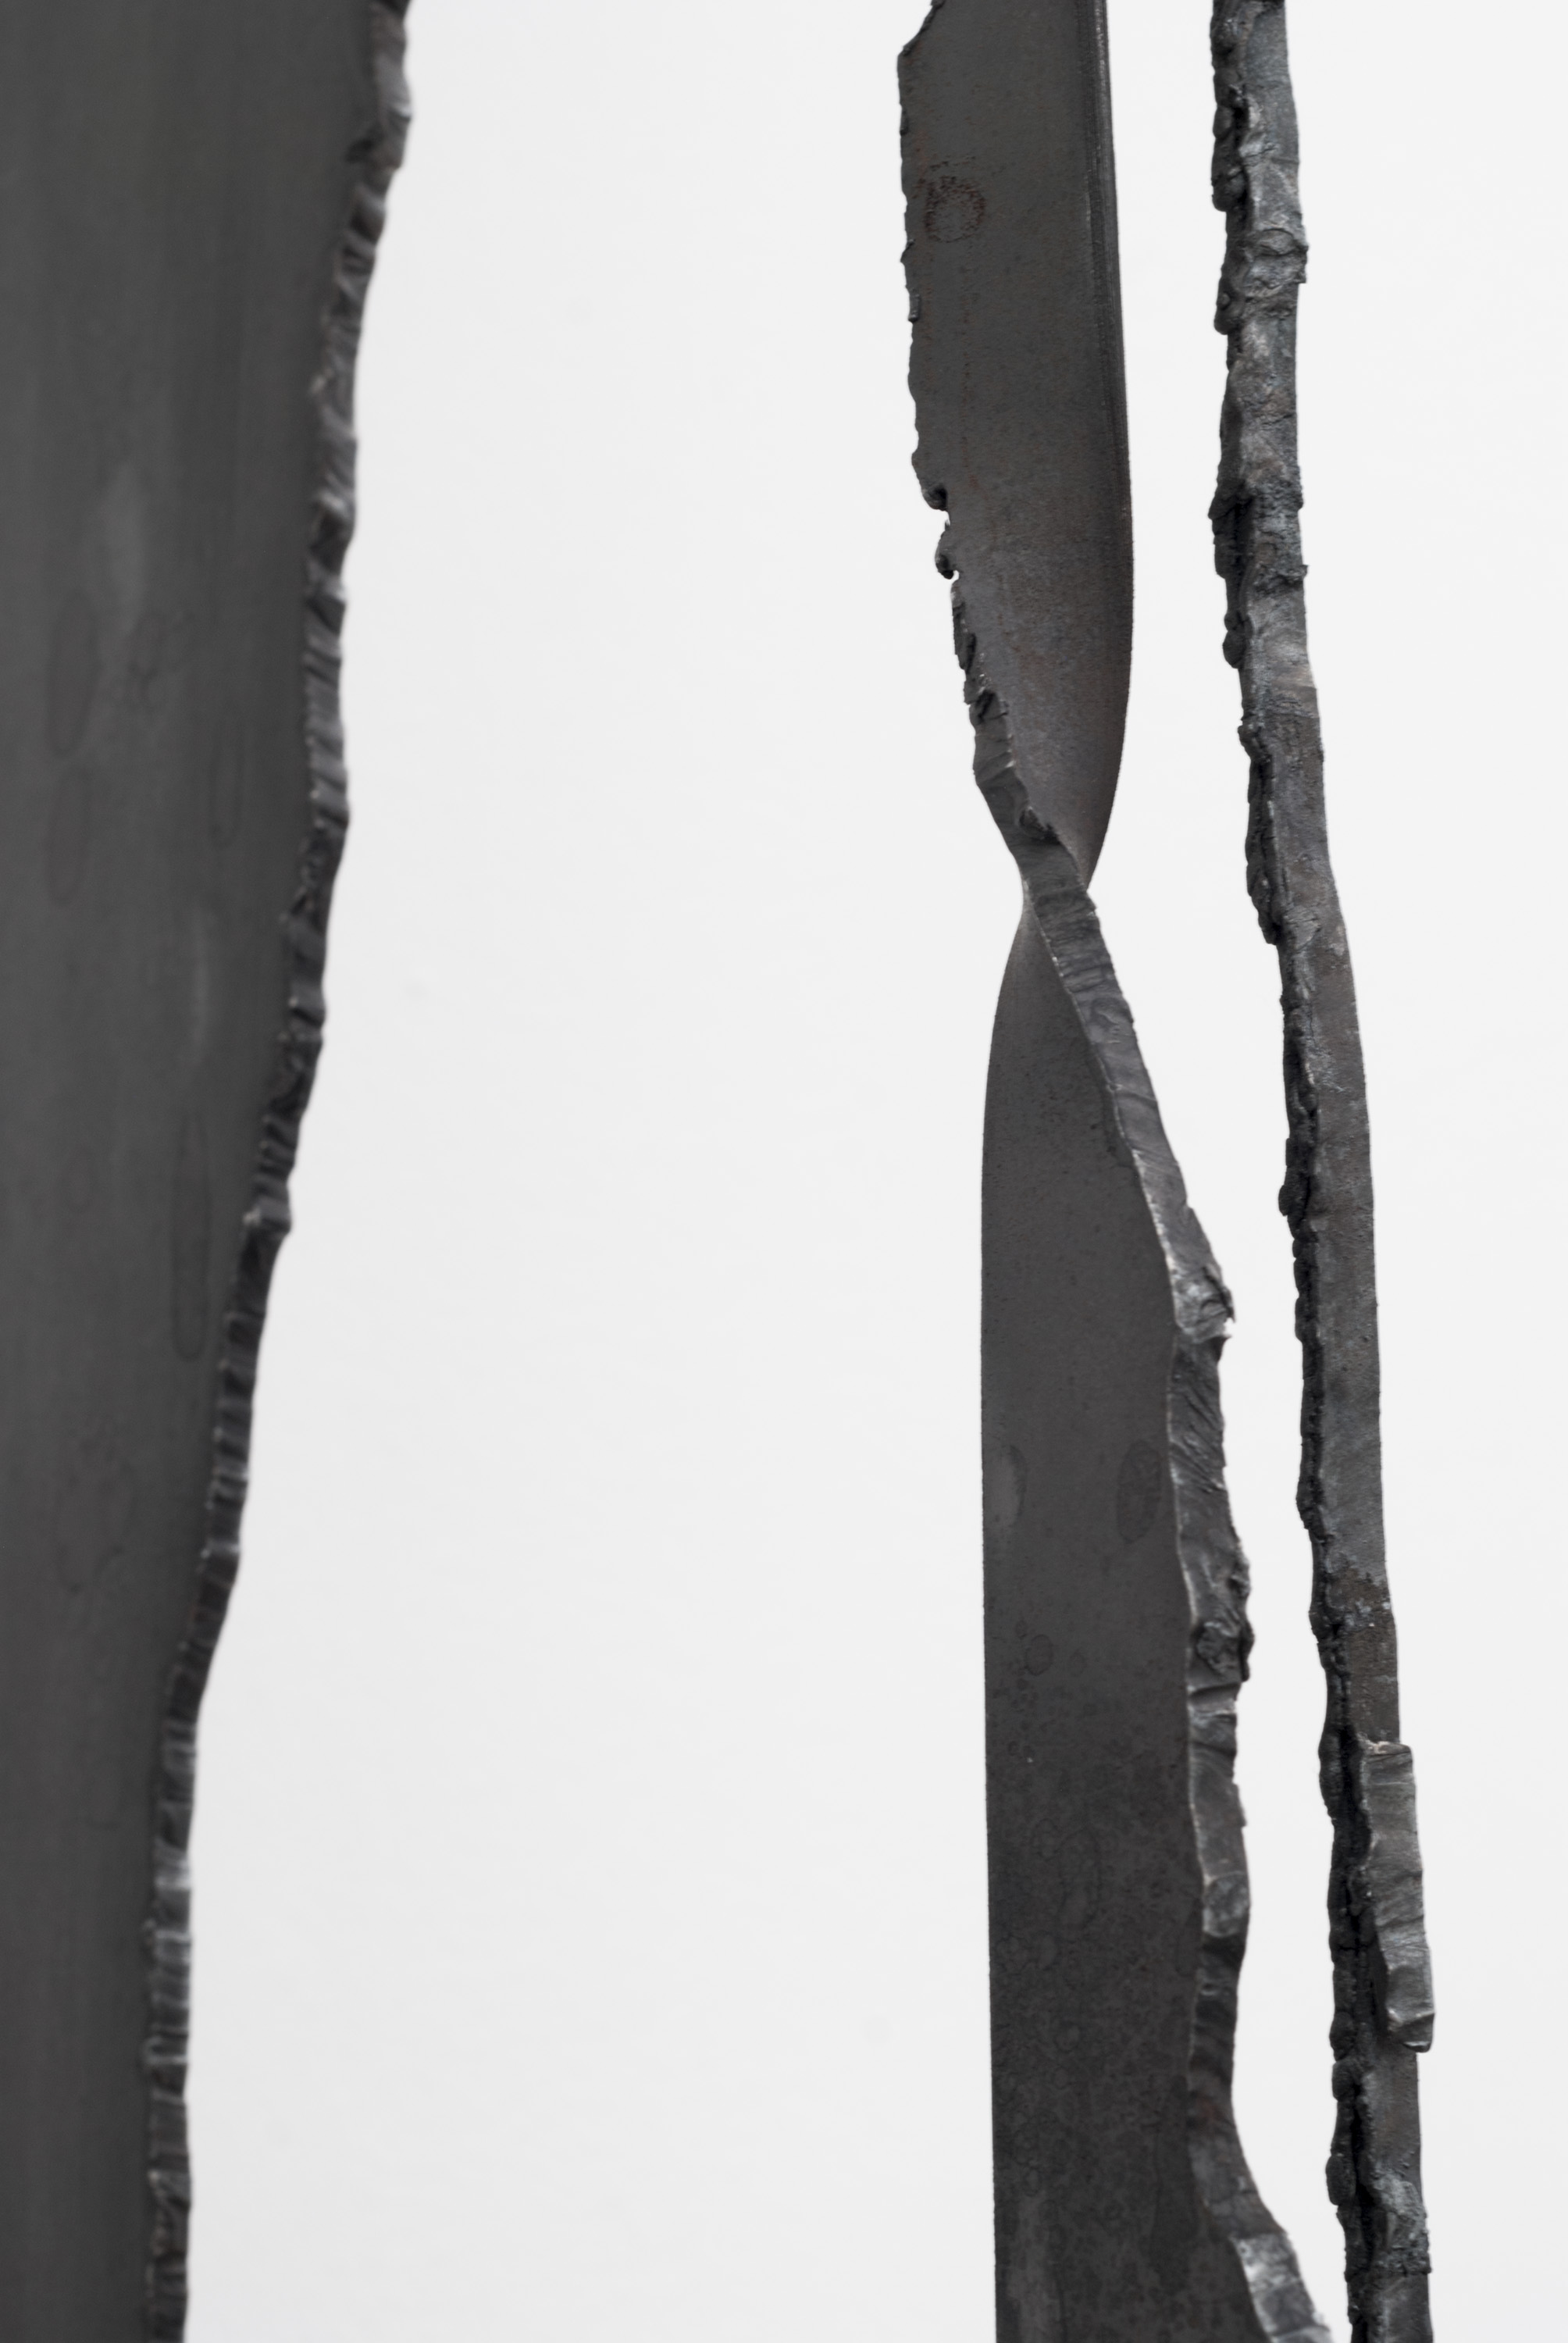 Cascade (detail), Nickel plated Mirror polished steel, Dry Graphite Lube finished Steel, 62